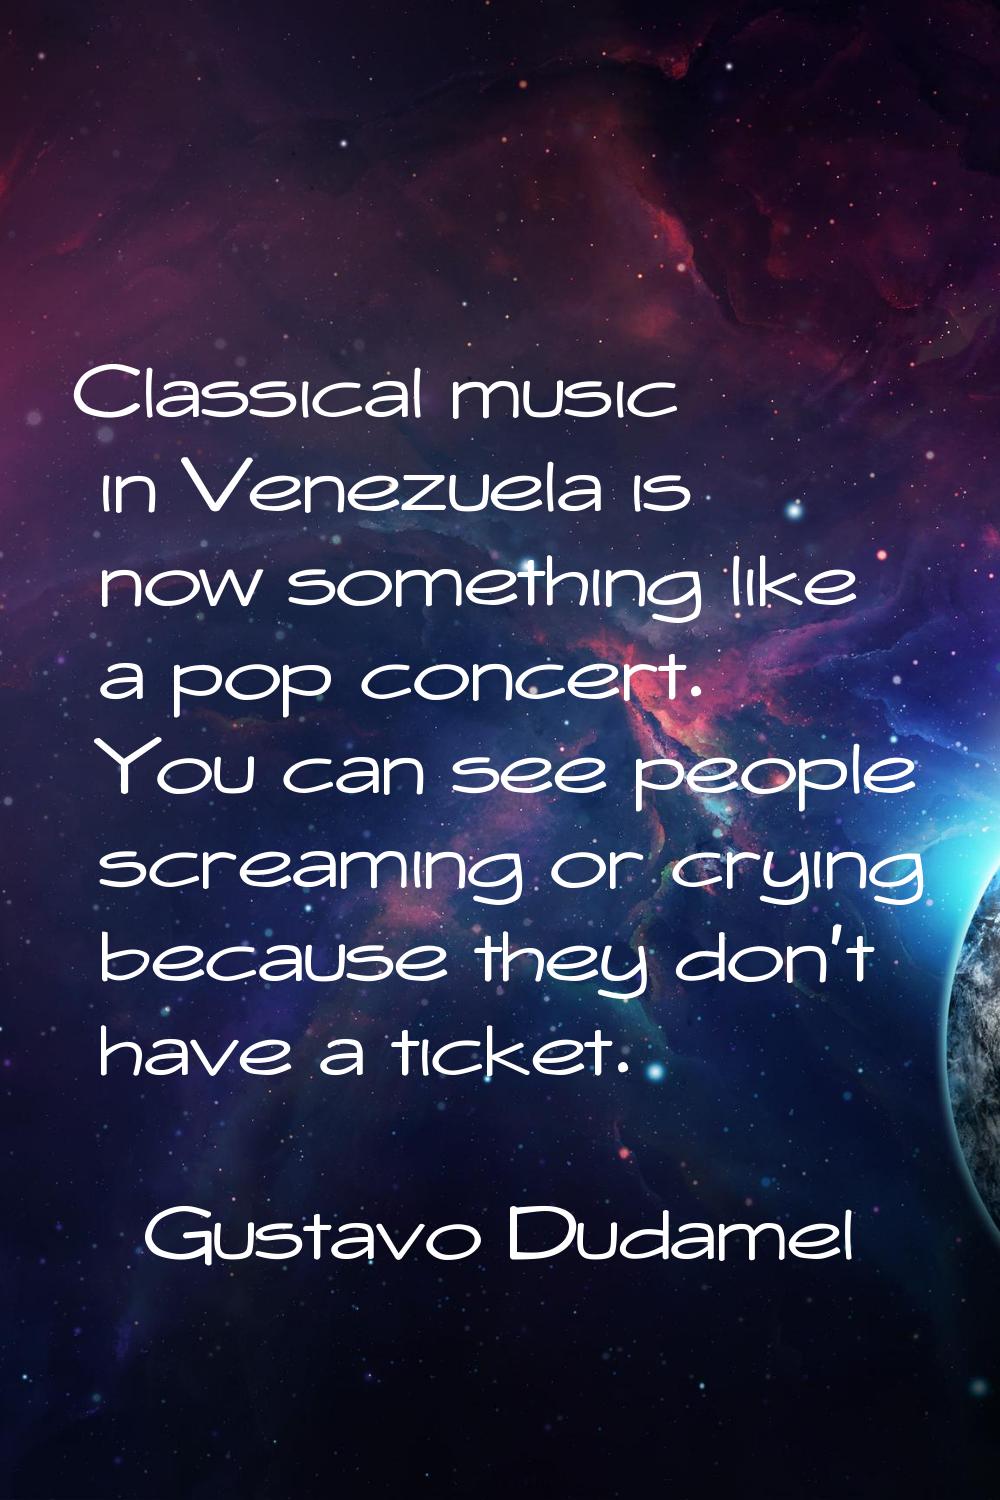 Classical music in Venezuela is now something like a pop concert. You can see people screaming or c